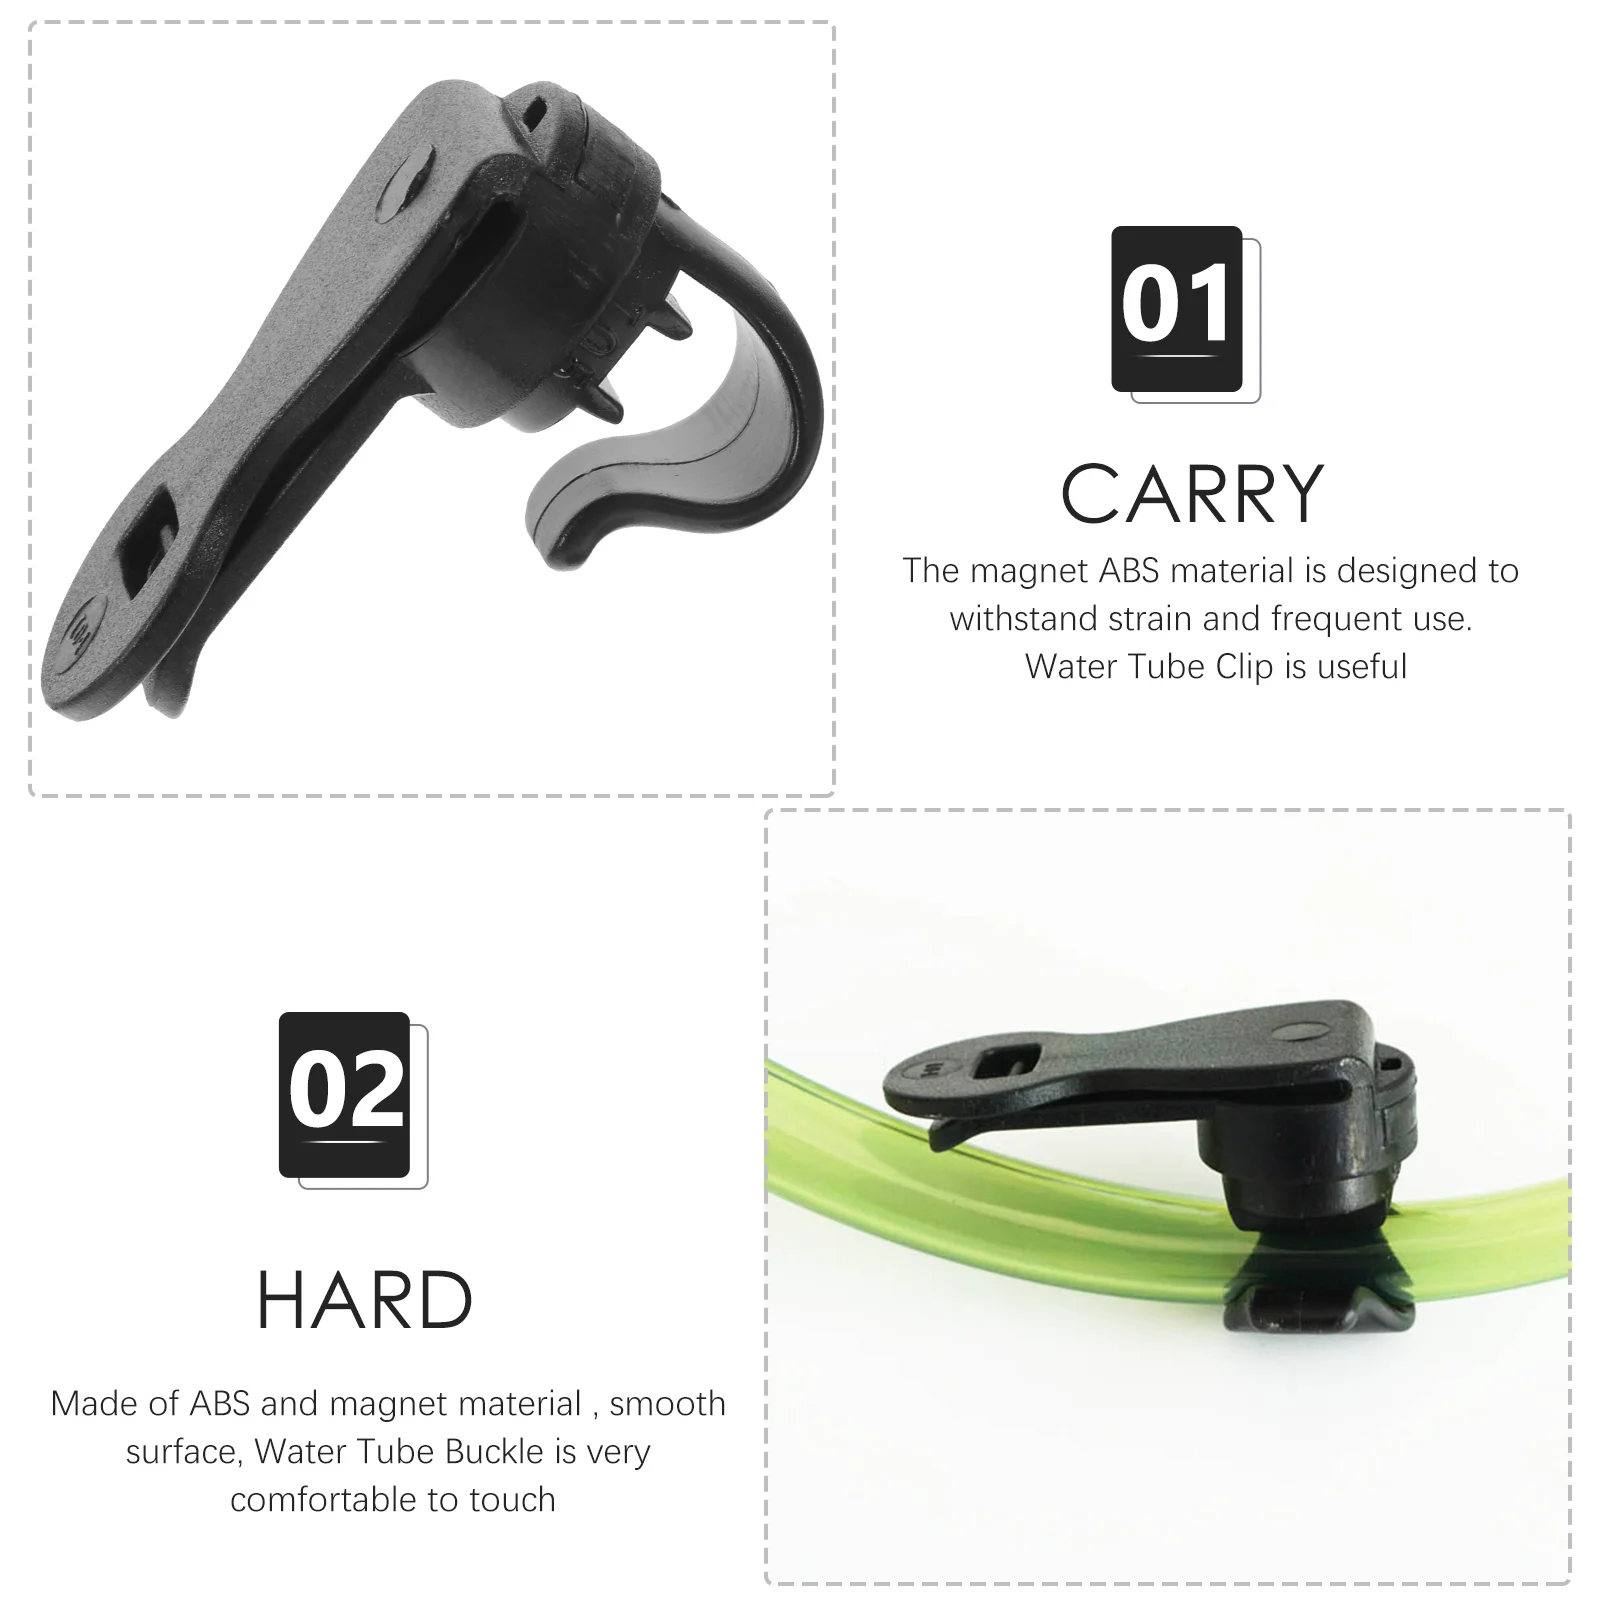 Water Tube Clip Magnetic Bladder Clip Backpack Clips Outdoor Backpack Accessories Source Hydration Packs Water Bladders